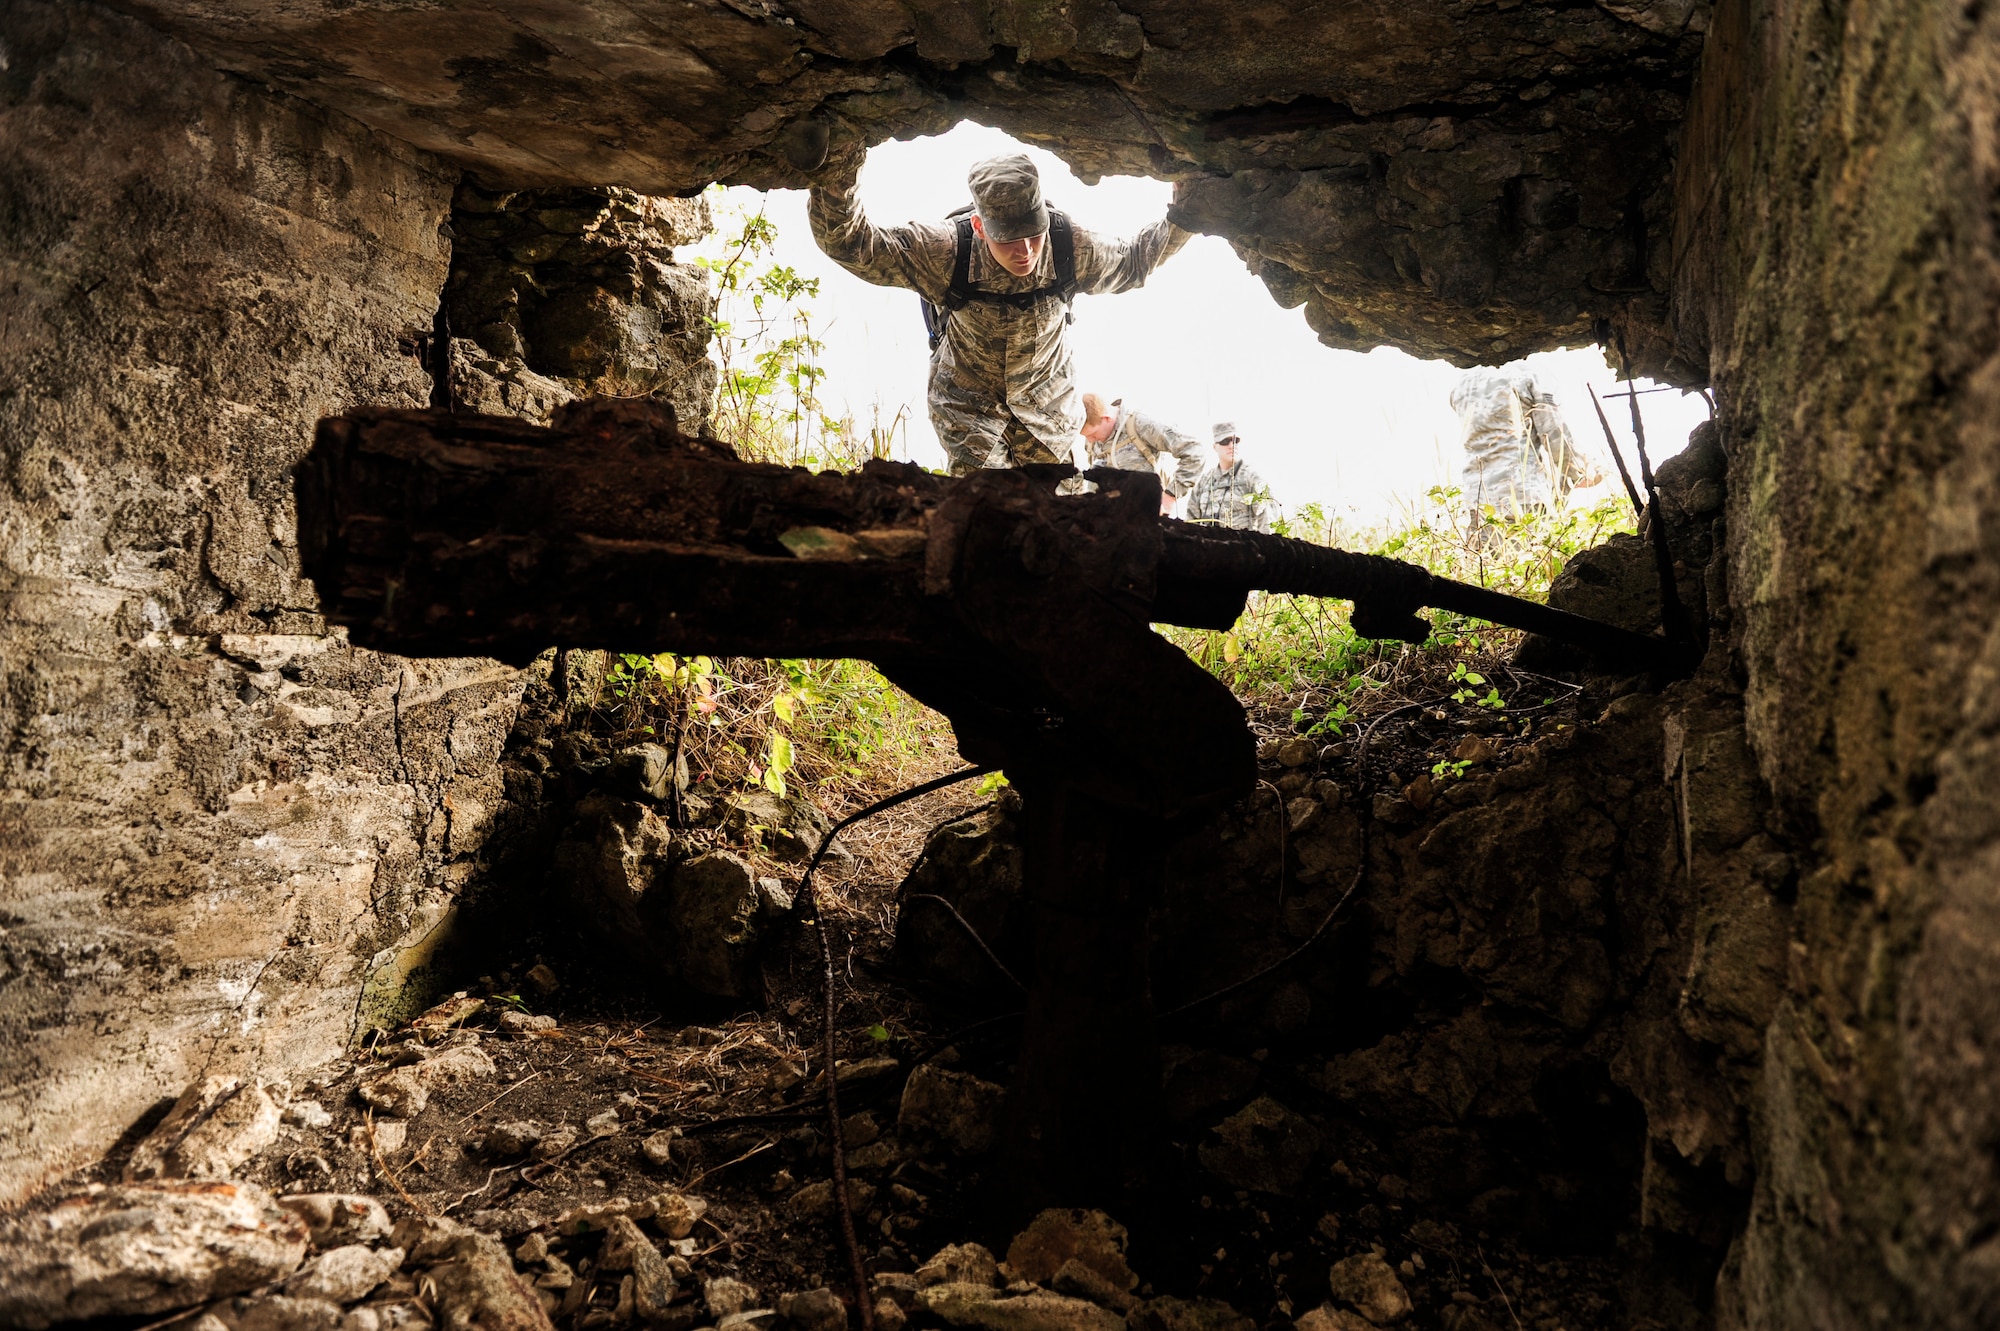 Airman 1st Class Jose Herrick, 18th Wing Judge Advocacy paralegal, peeks into the ruins of a Japanese bunker used during World War II, Jan. 8, 2015, on Iwo To, Japan. The U.S. Marine Corps led a 36-day assault on the island during the Battle of Iwo Jima. Japanese forces hid machinegun nests and other artillery weaponry to deter the invading Marines. (U.S. Air Force photo by Airman 1st Class John Linzmeier)